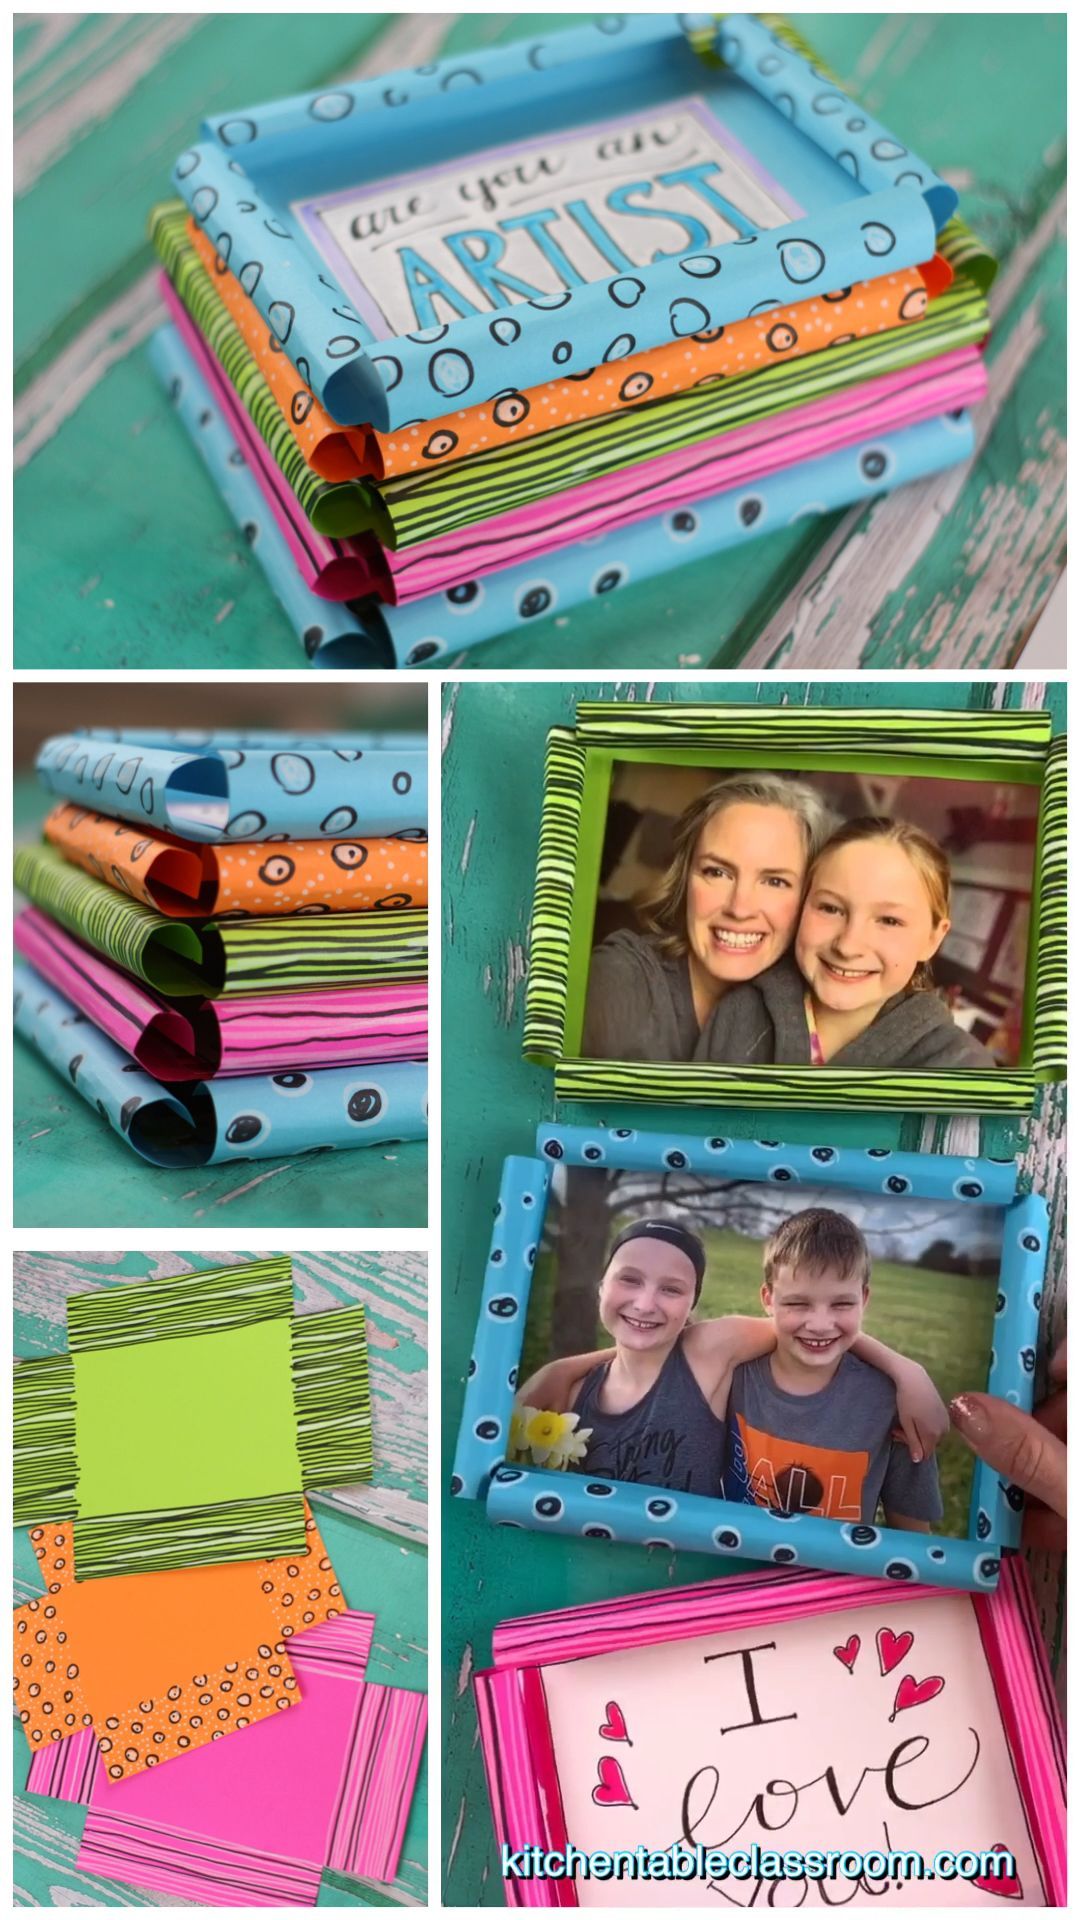 DIY Picture Frame- Super Simple Paper Picture Frames - The Kitchen Table Classroom - DIY Picture Frame- Super Simple Paper Picture Frames - The Kitchen Table Classroom -   19 diy Paper frame ideas